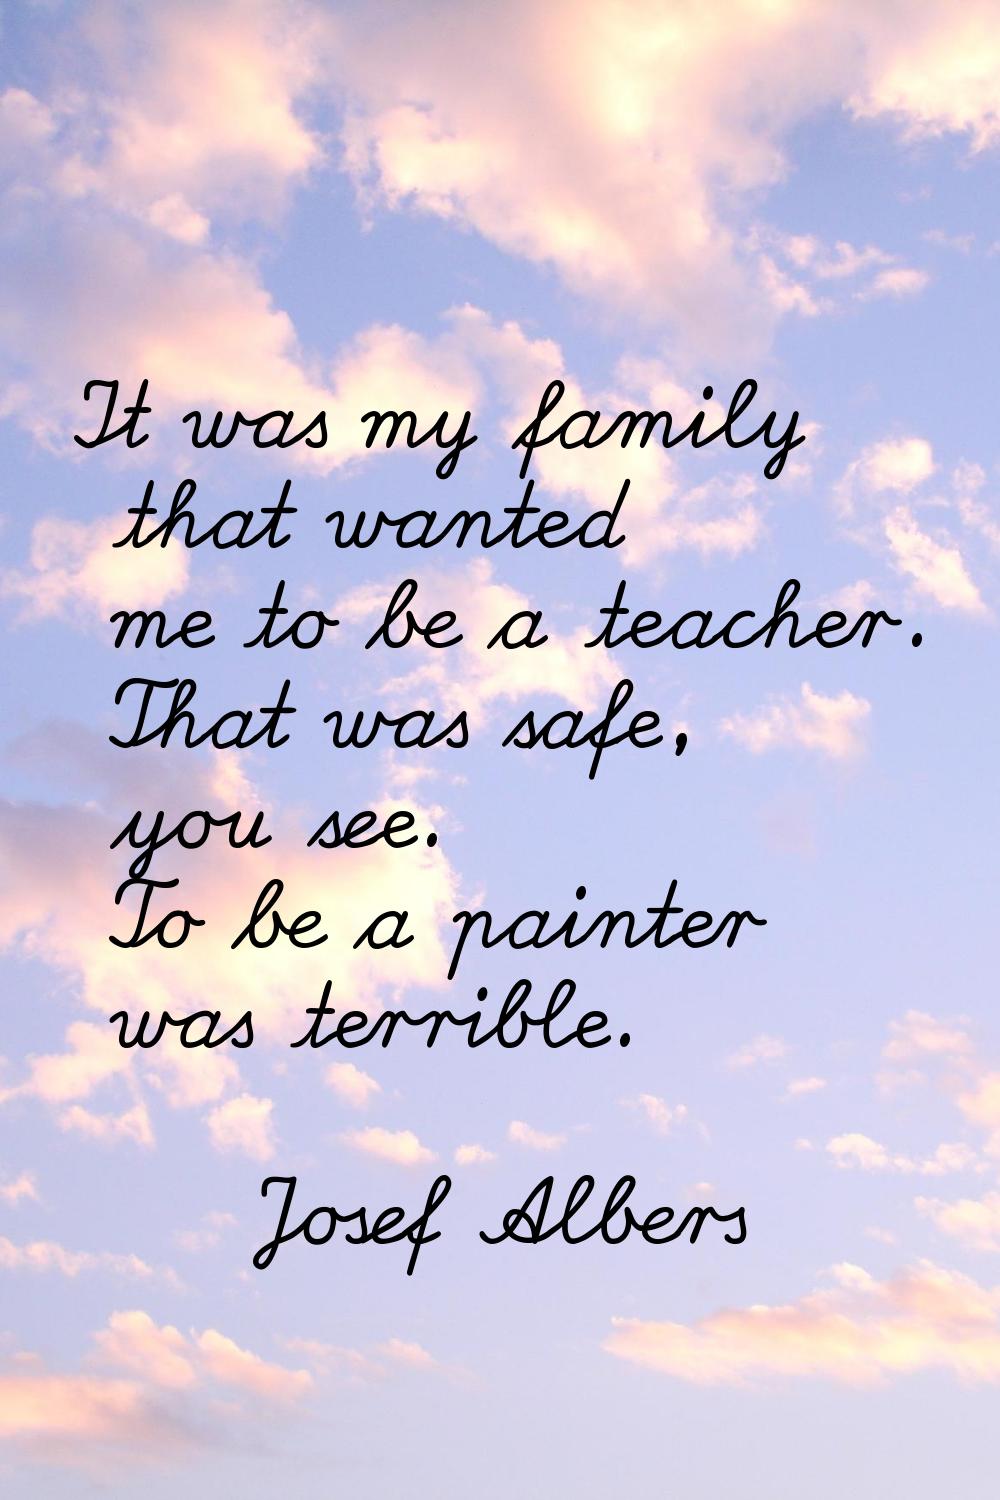 It was my family that wanted me to be a teacher. That was safe, you see. To be a painter was terrib